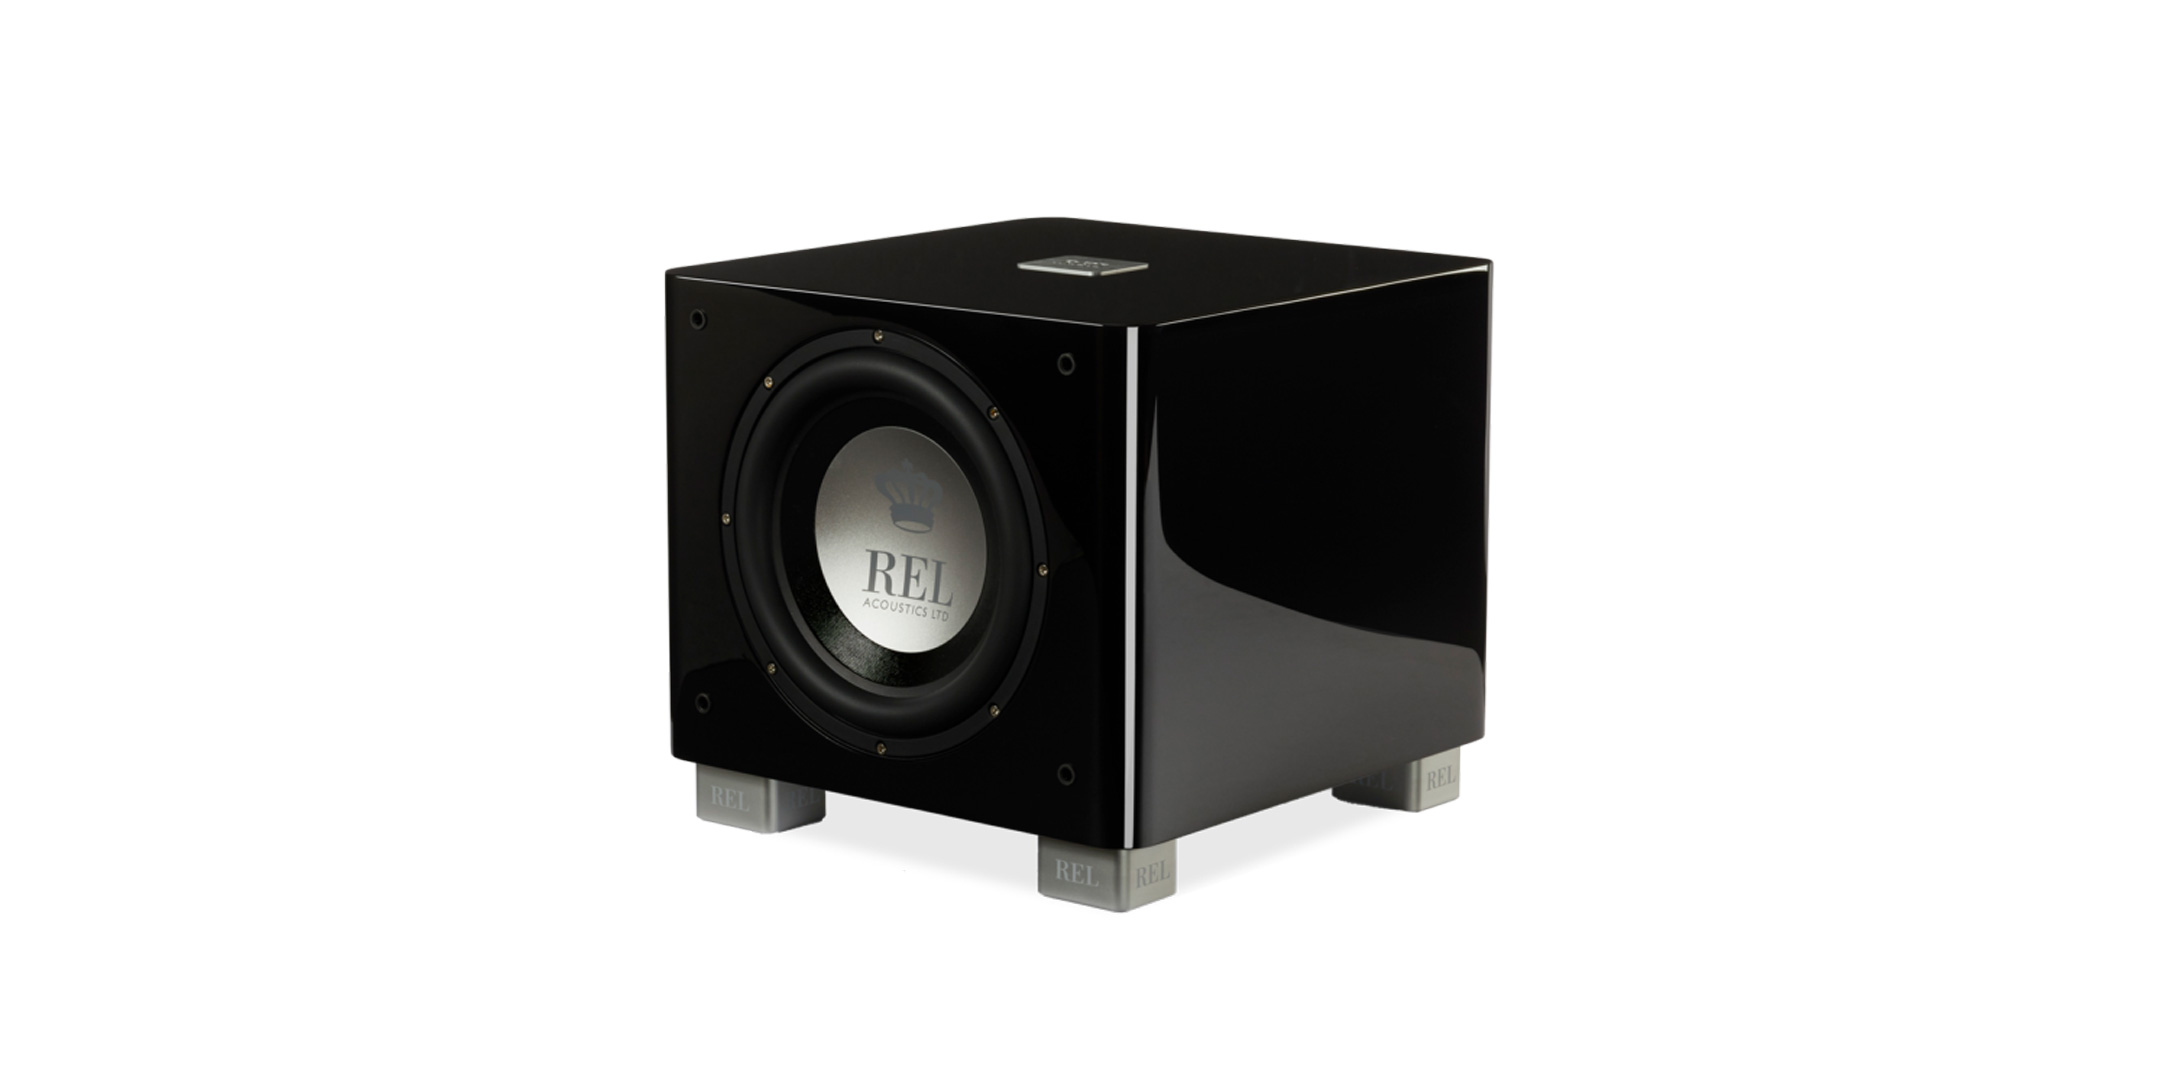 Pic showing the front and top of the REL T/9x Subwoofer